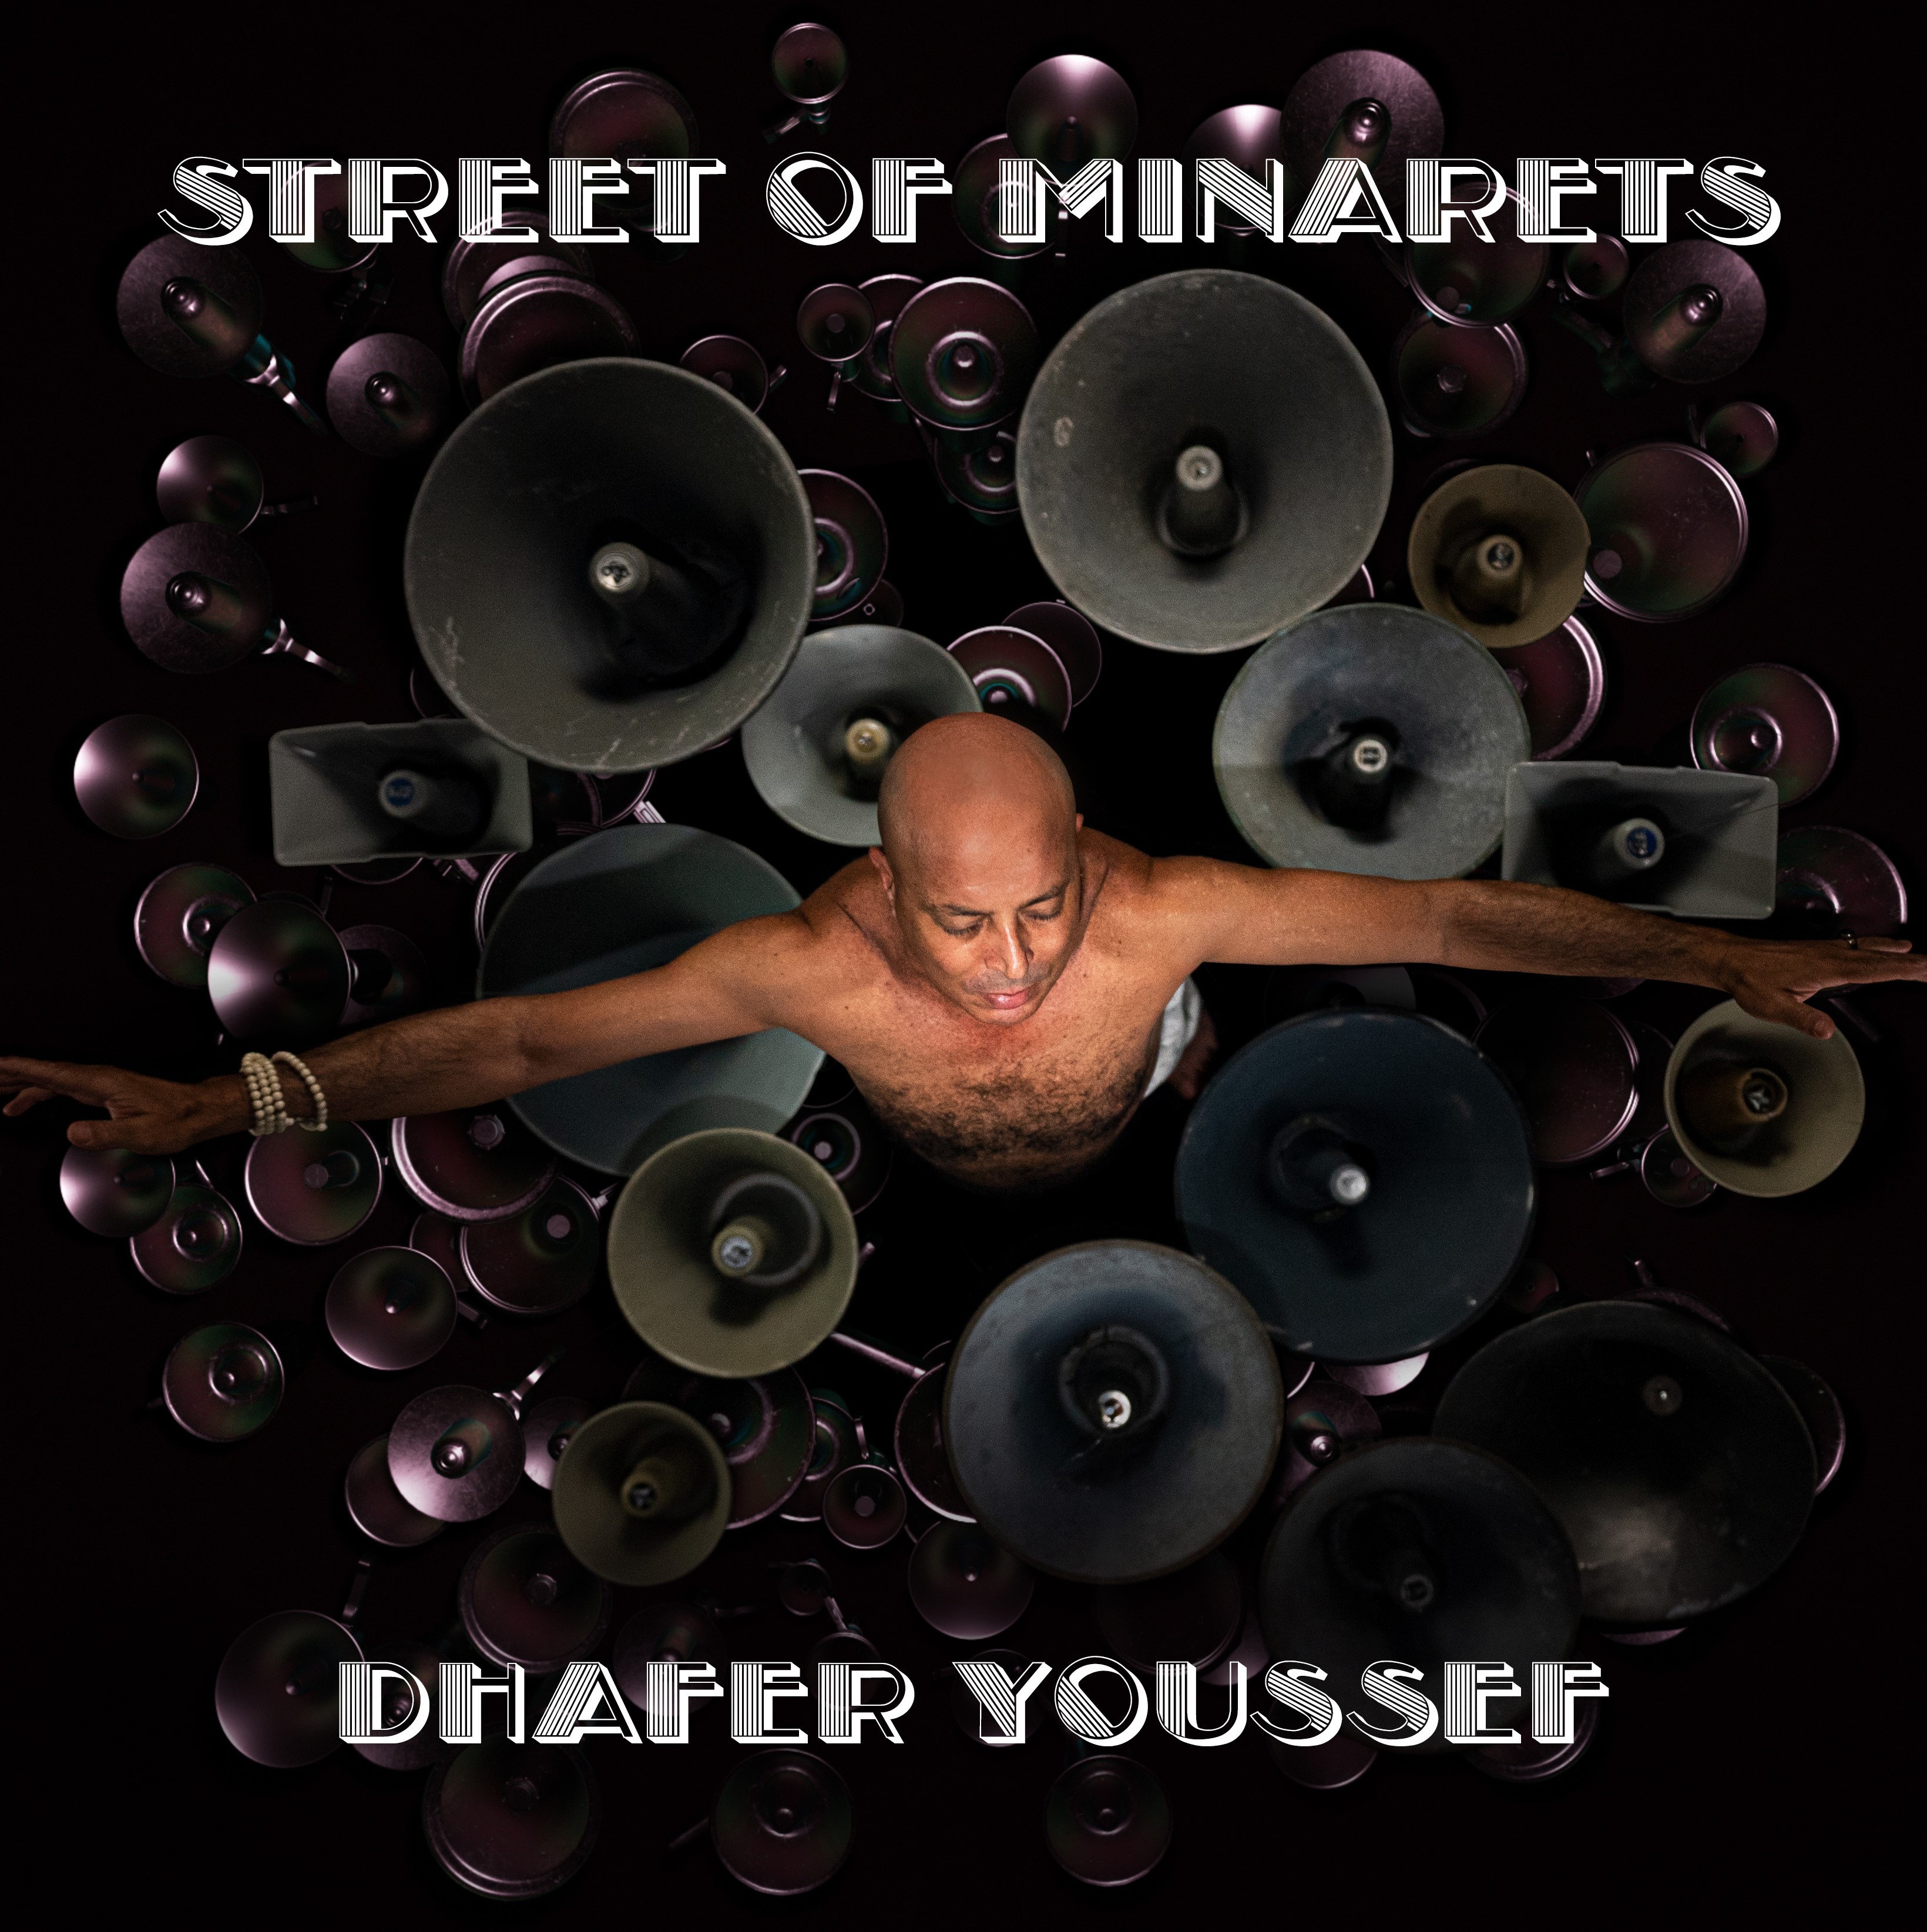 DHAFER YOUSSEF ANNOUNCES NEW ALBUM STREET OF MINARETS OUT JANUARY 27